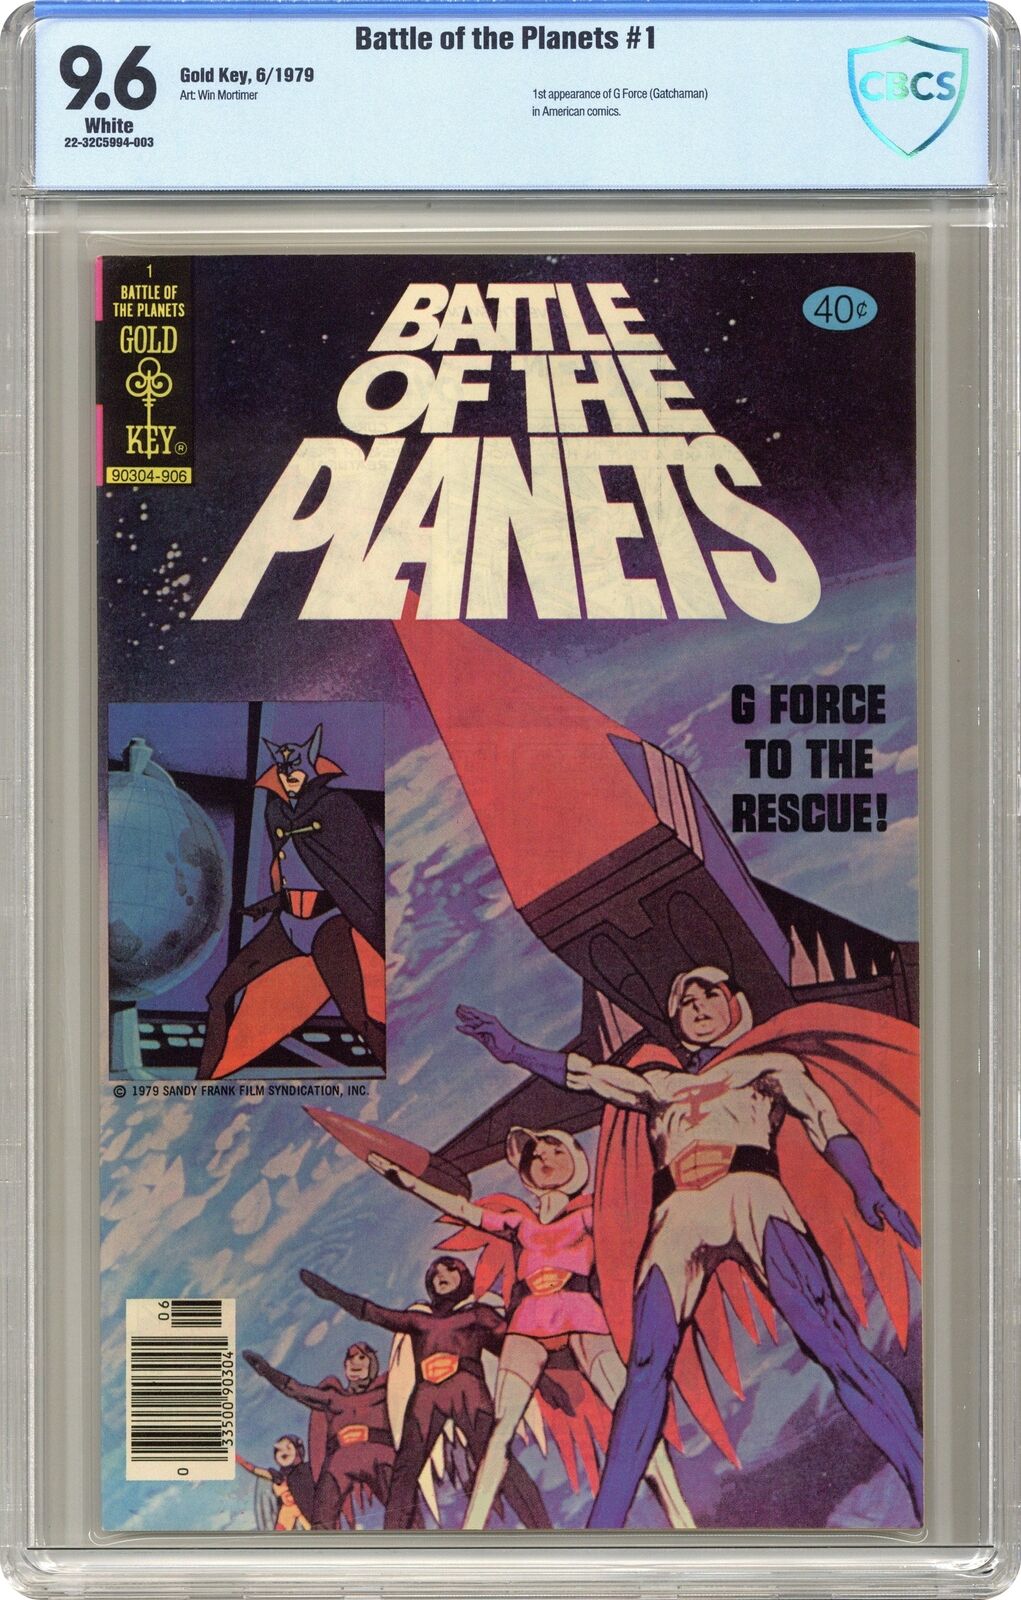 Battle of the Planets #1 CBCS 9.6 1979 Gold Key 22-32C5994-003